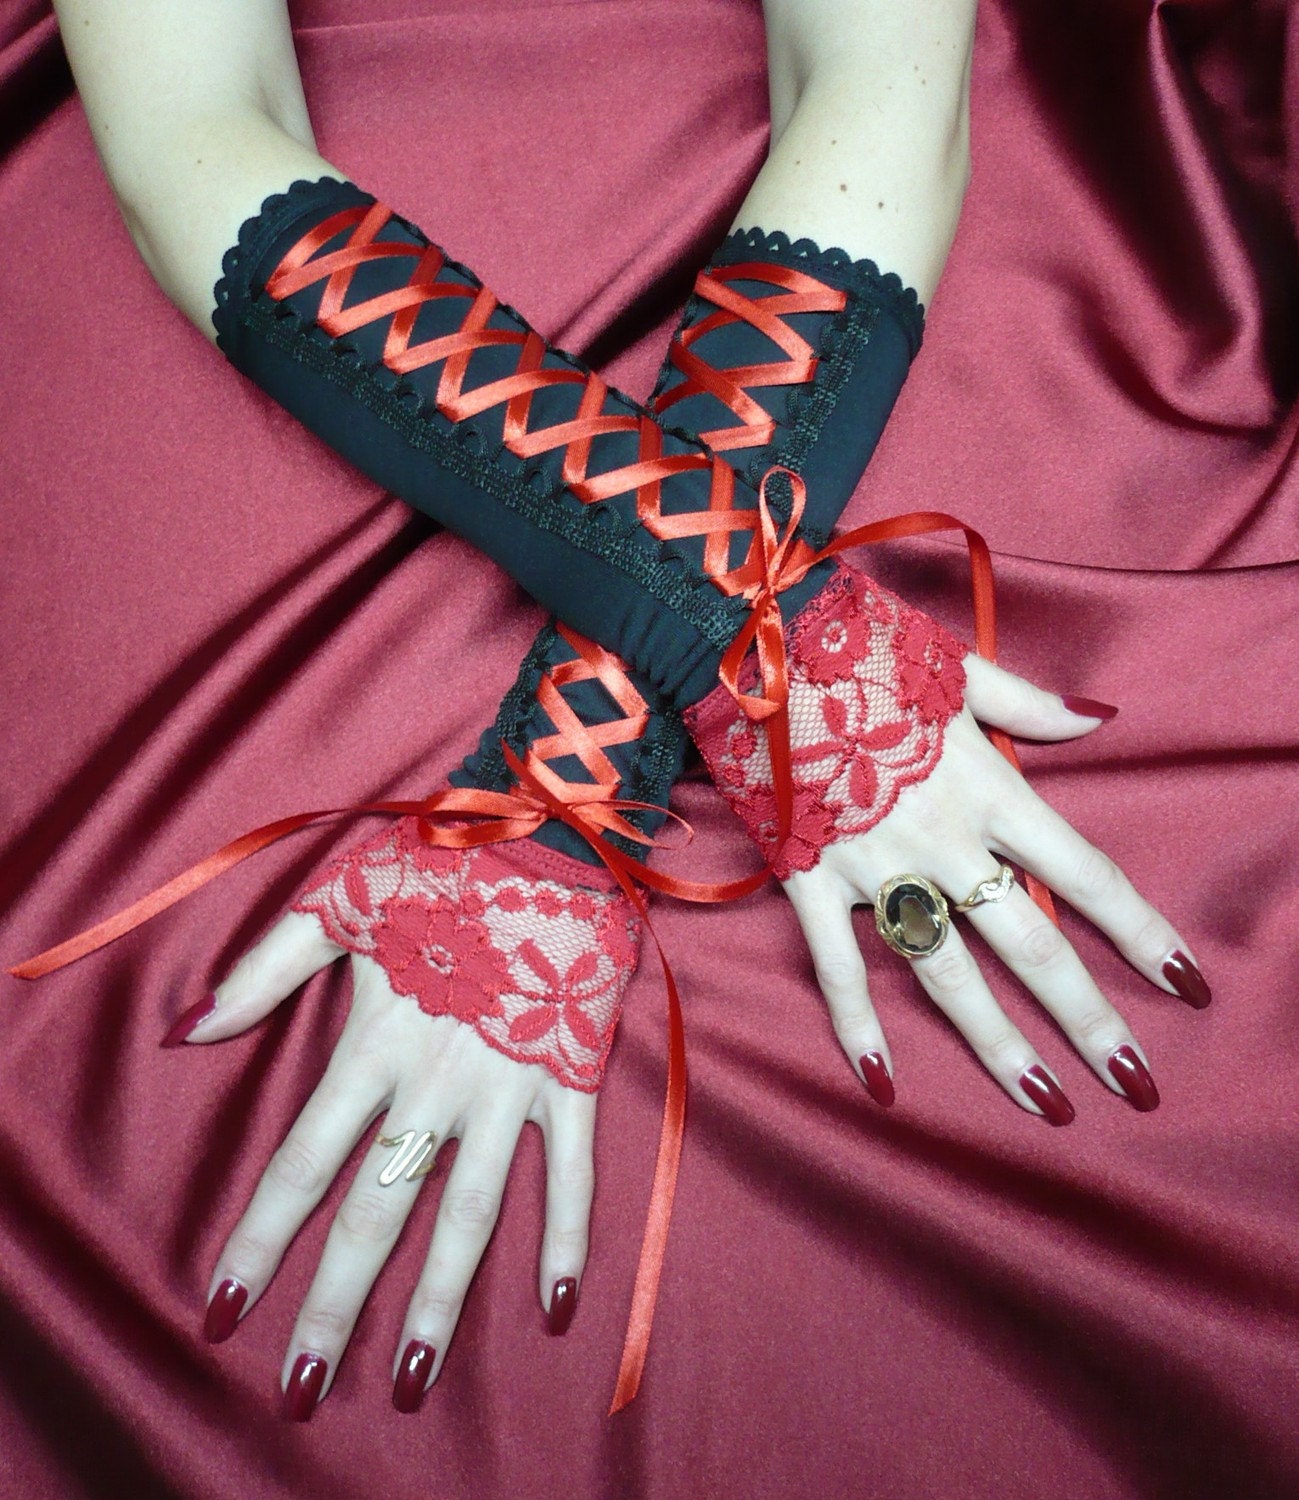 Beautiful Cabaret Corset Armwarmers with Red Lace, Fingerless Gloves in Gothic, Tribal Dance, Renaissance Style, Very Feminine